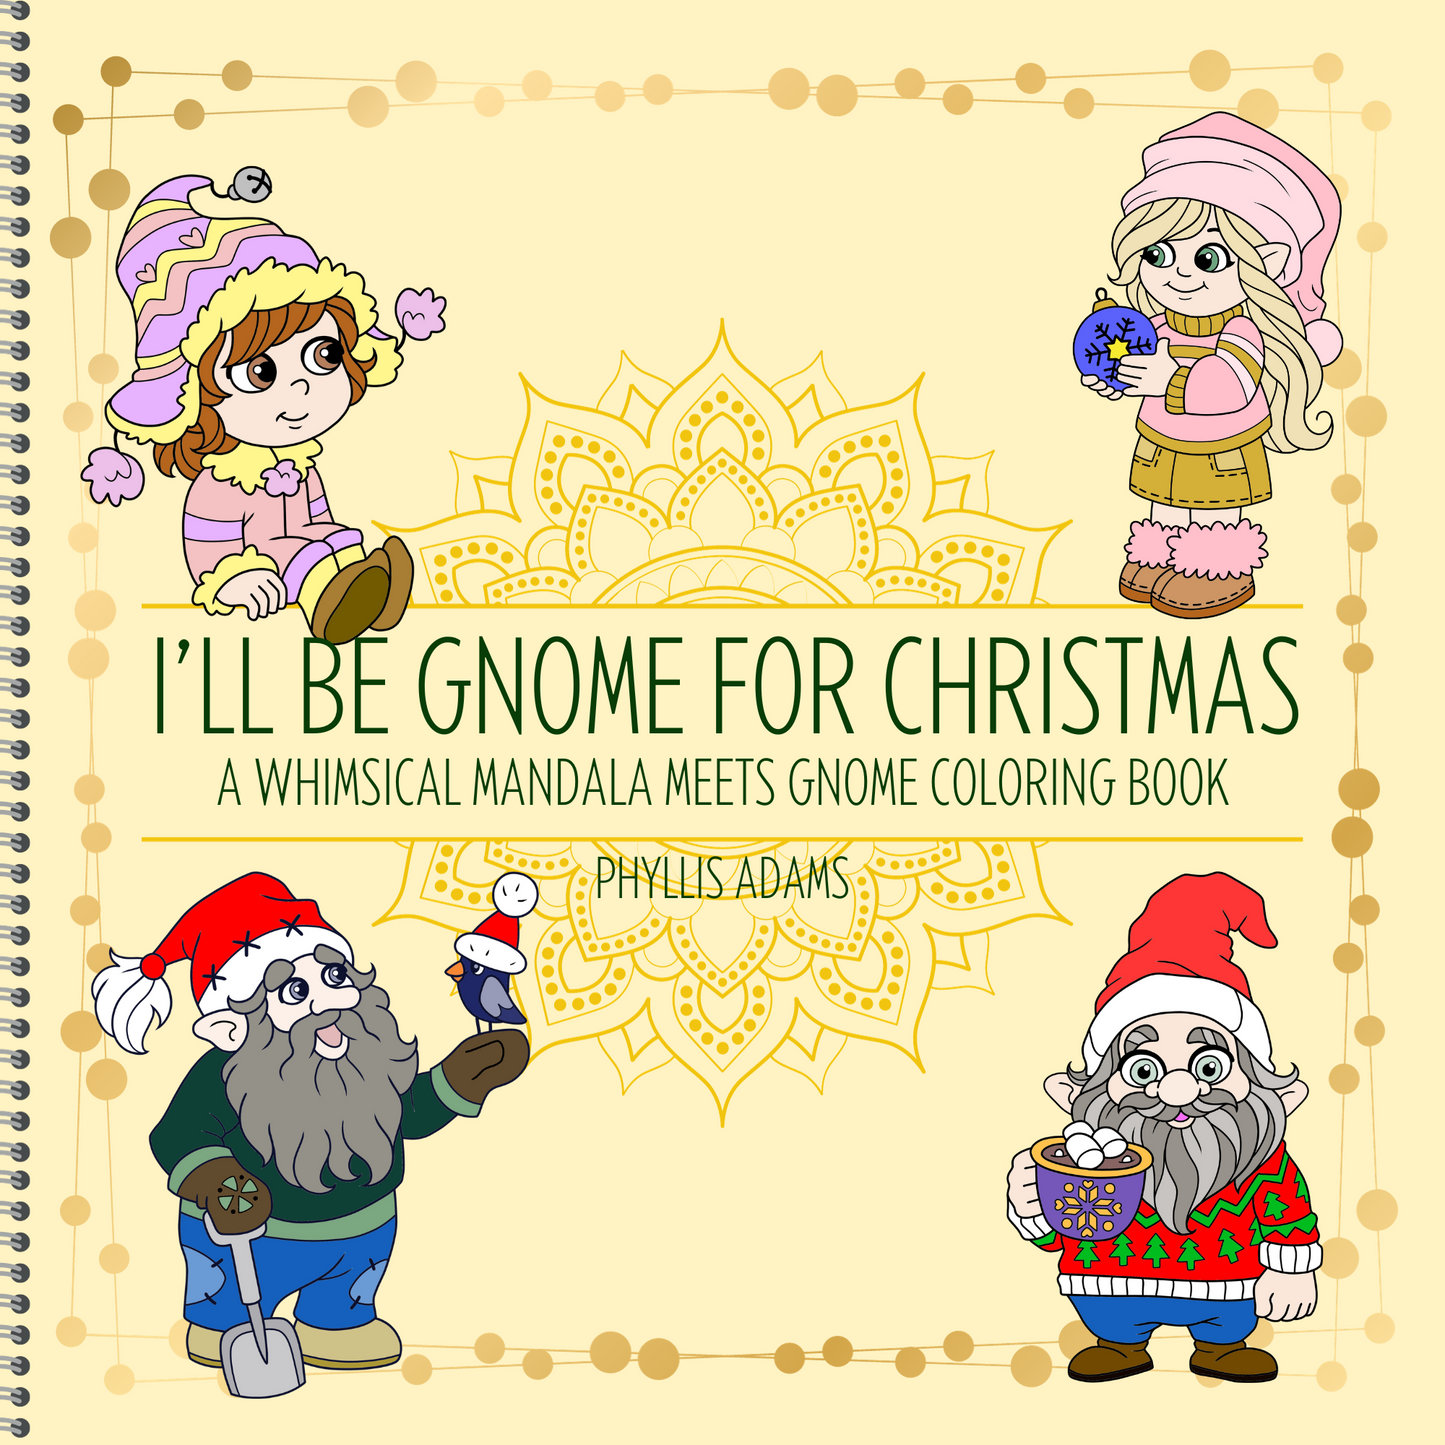 I'LL BE GNOME FOR CHRISTMAS - A WHIMSICAL MANDALA MEETS GNOME COLORING BOOK